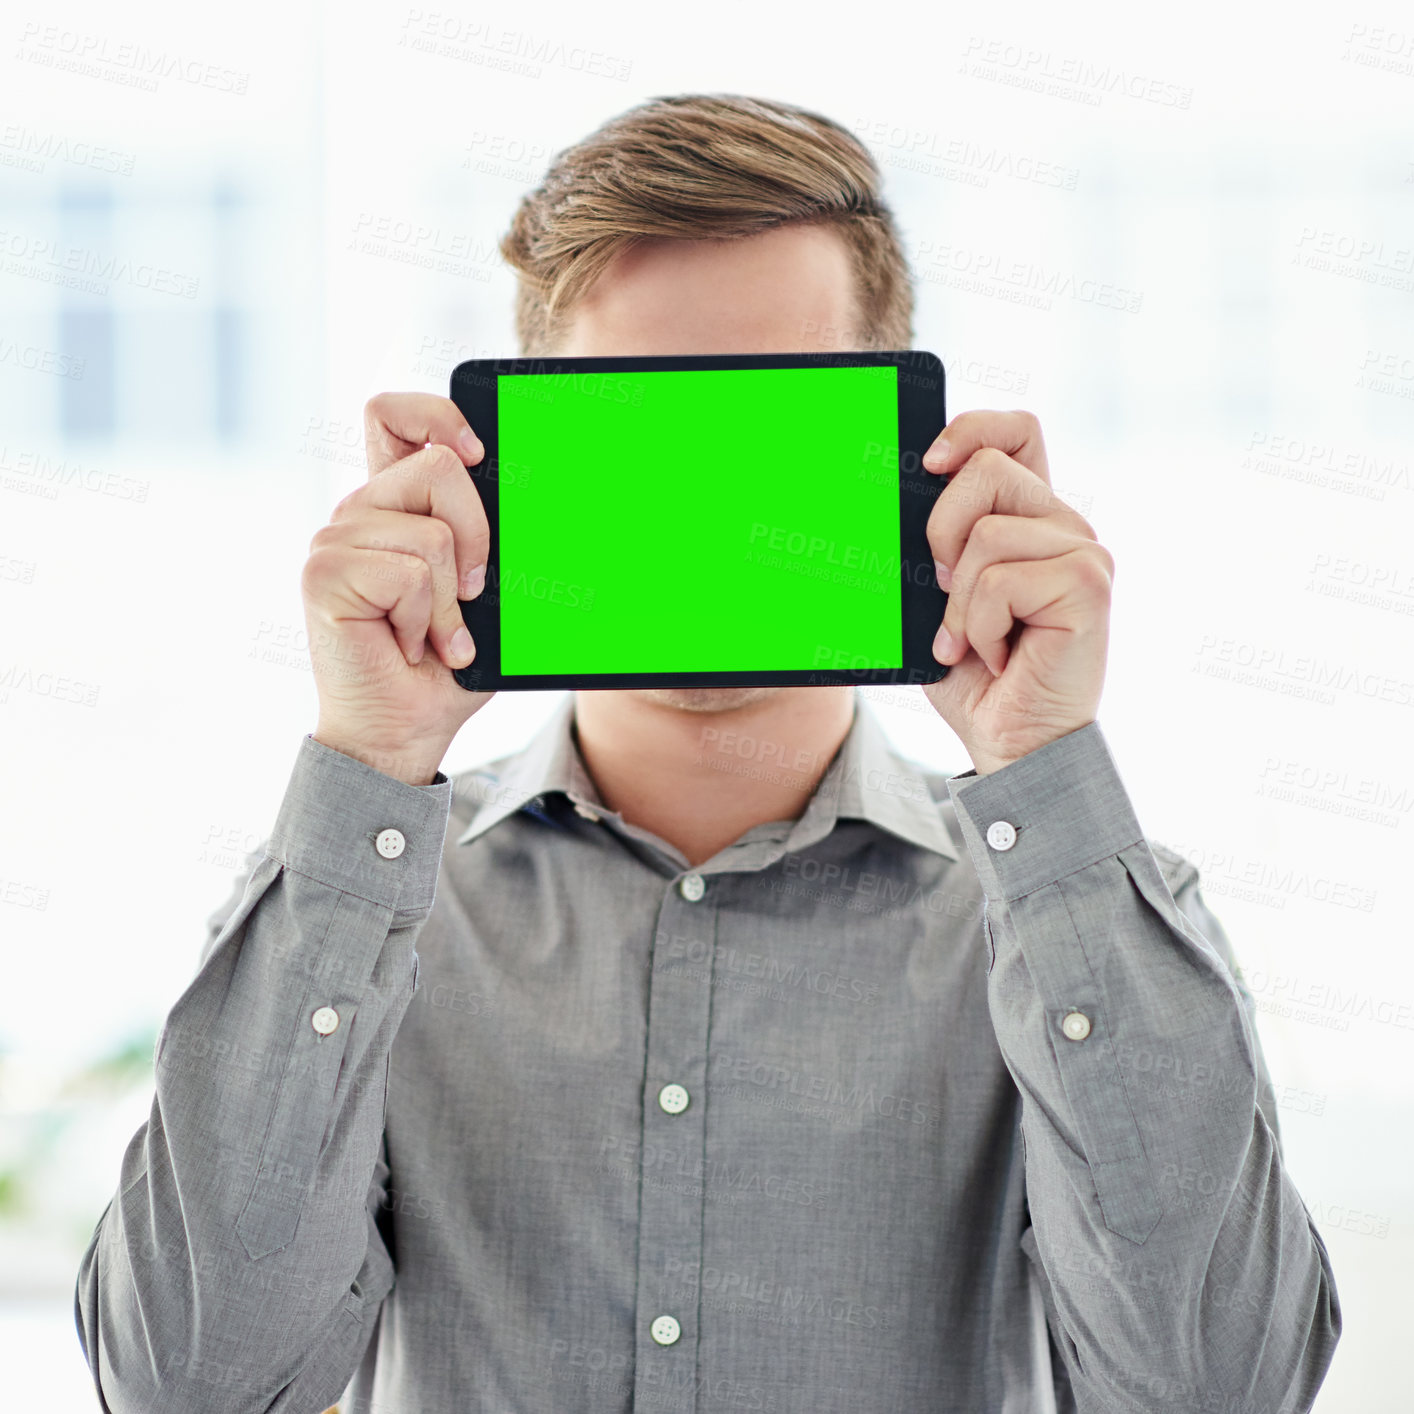 Buy stock photo Shot of a man holding a digital tablet with a chroma key screen in front of his face